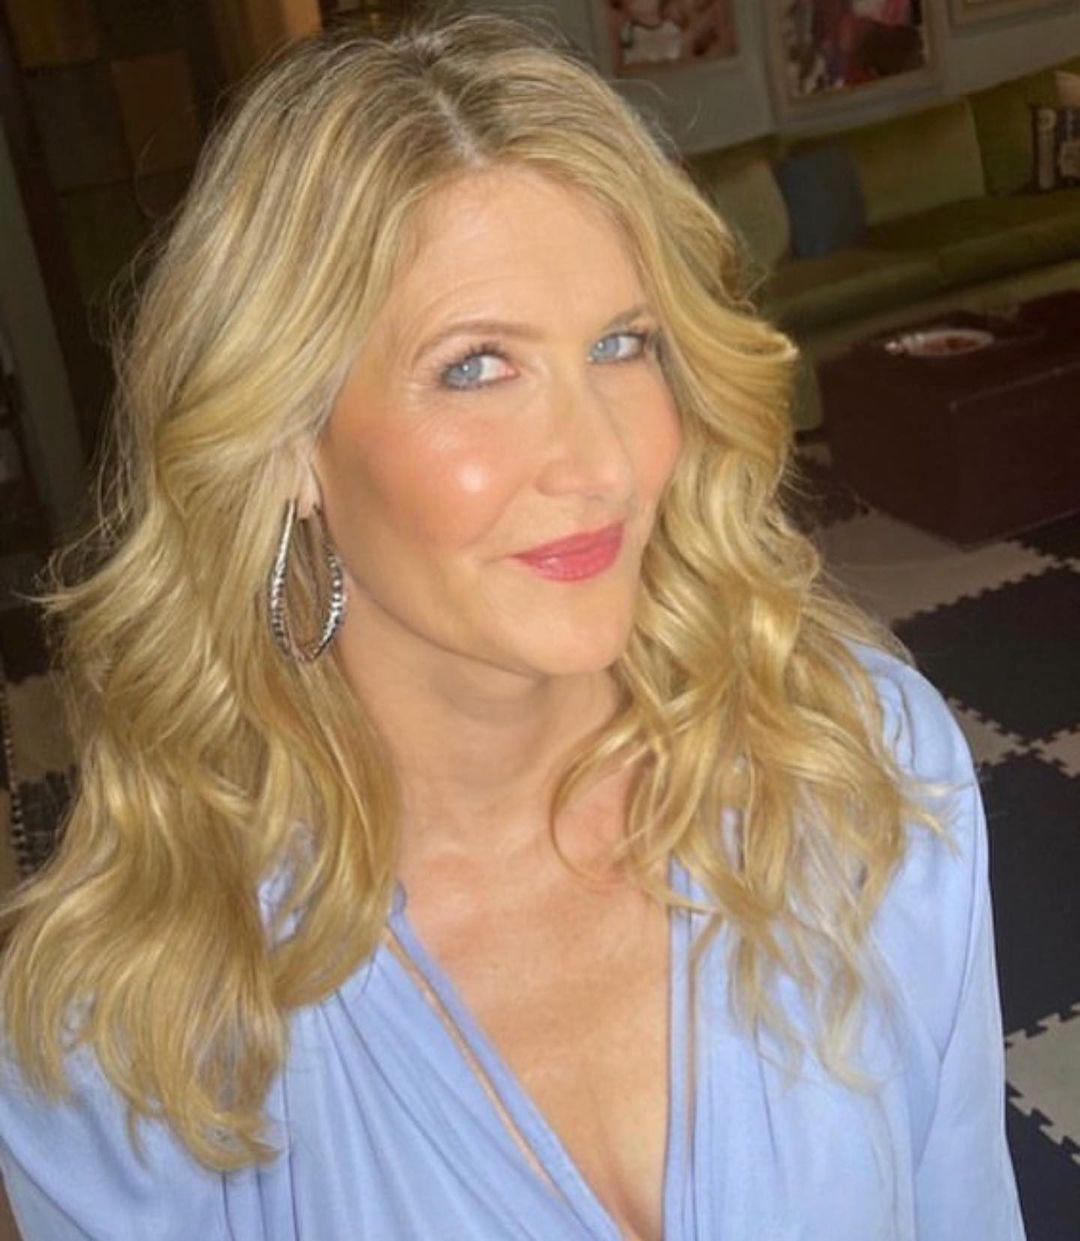 class="content__text"
 Happy birthday to the divine @lauradern 🥂❤️🦄

 #lauradern #happybirthday #theloveliest 
 